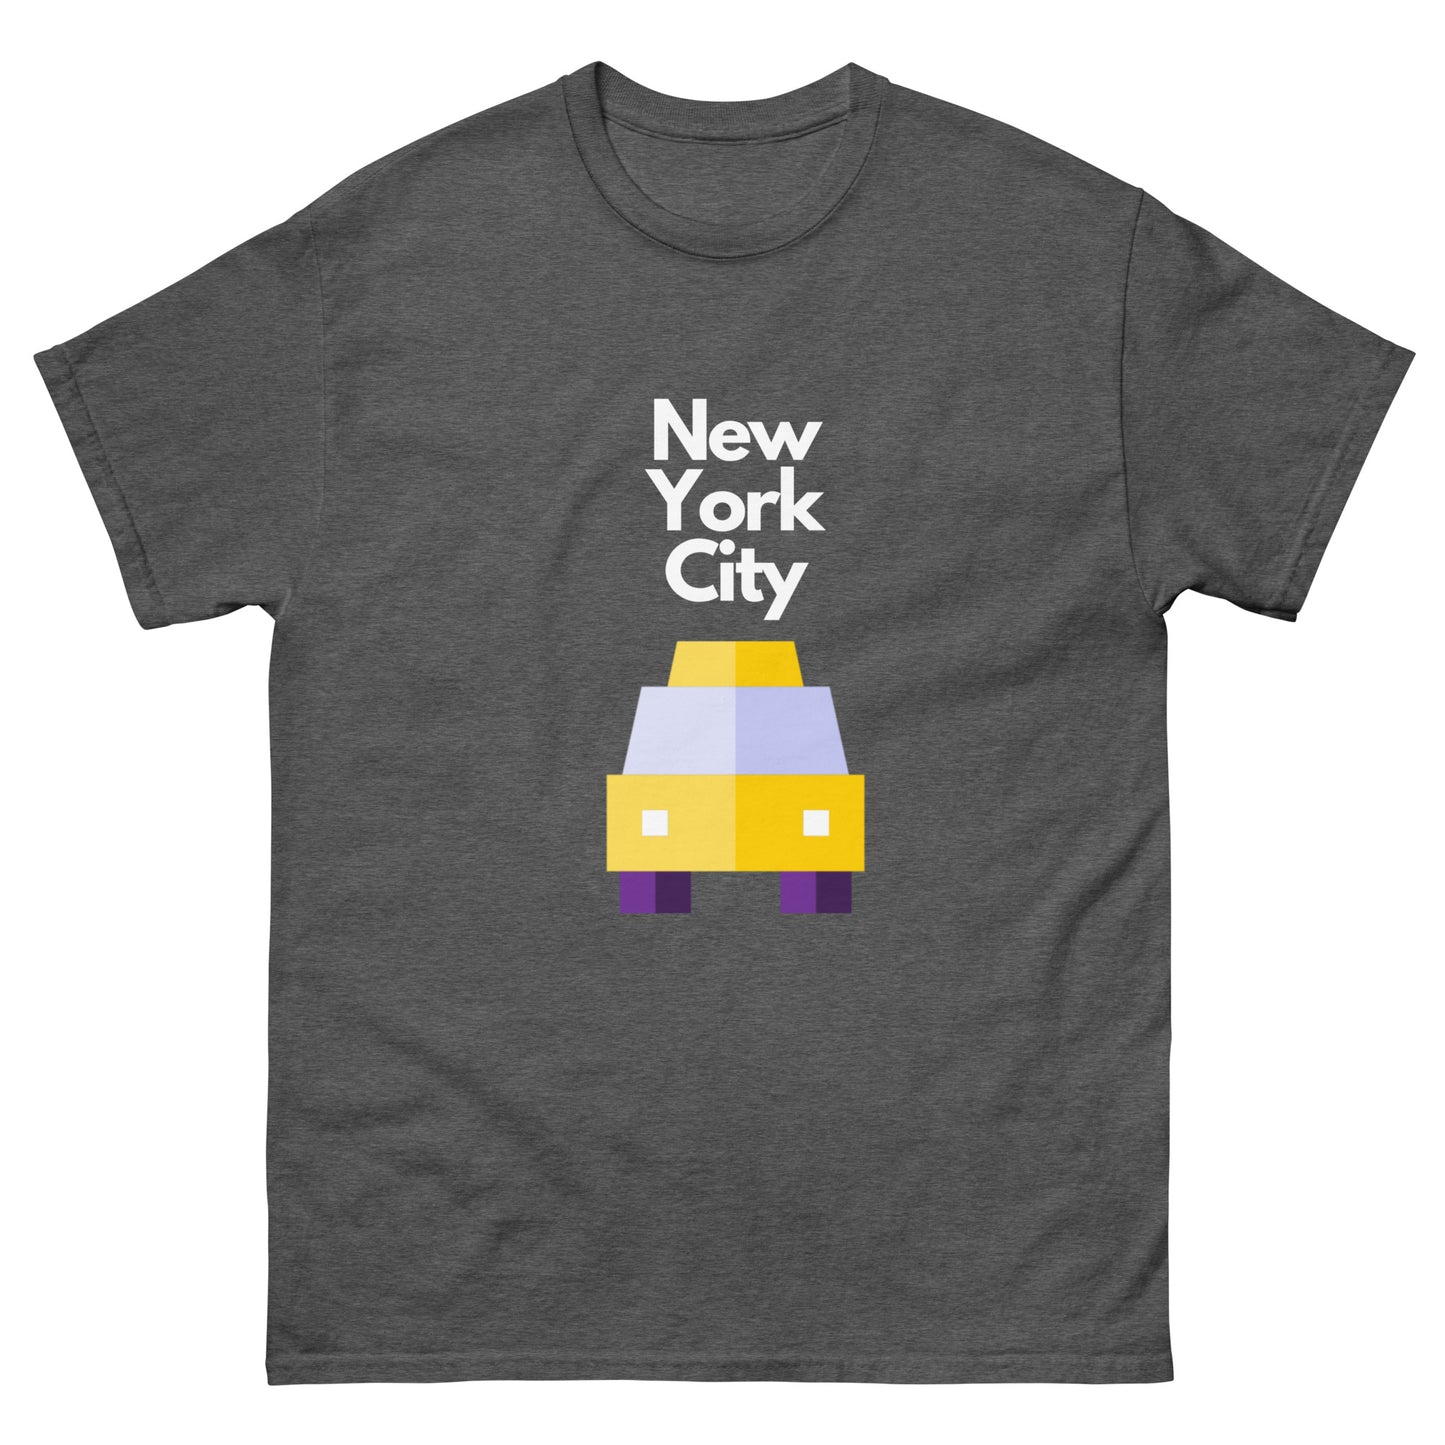 New York City - Yellow Pixelated Taxi T-Shirt